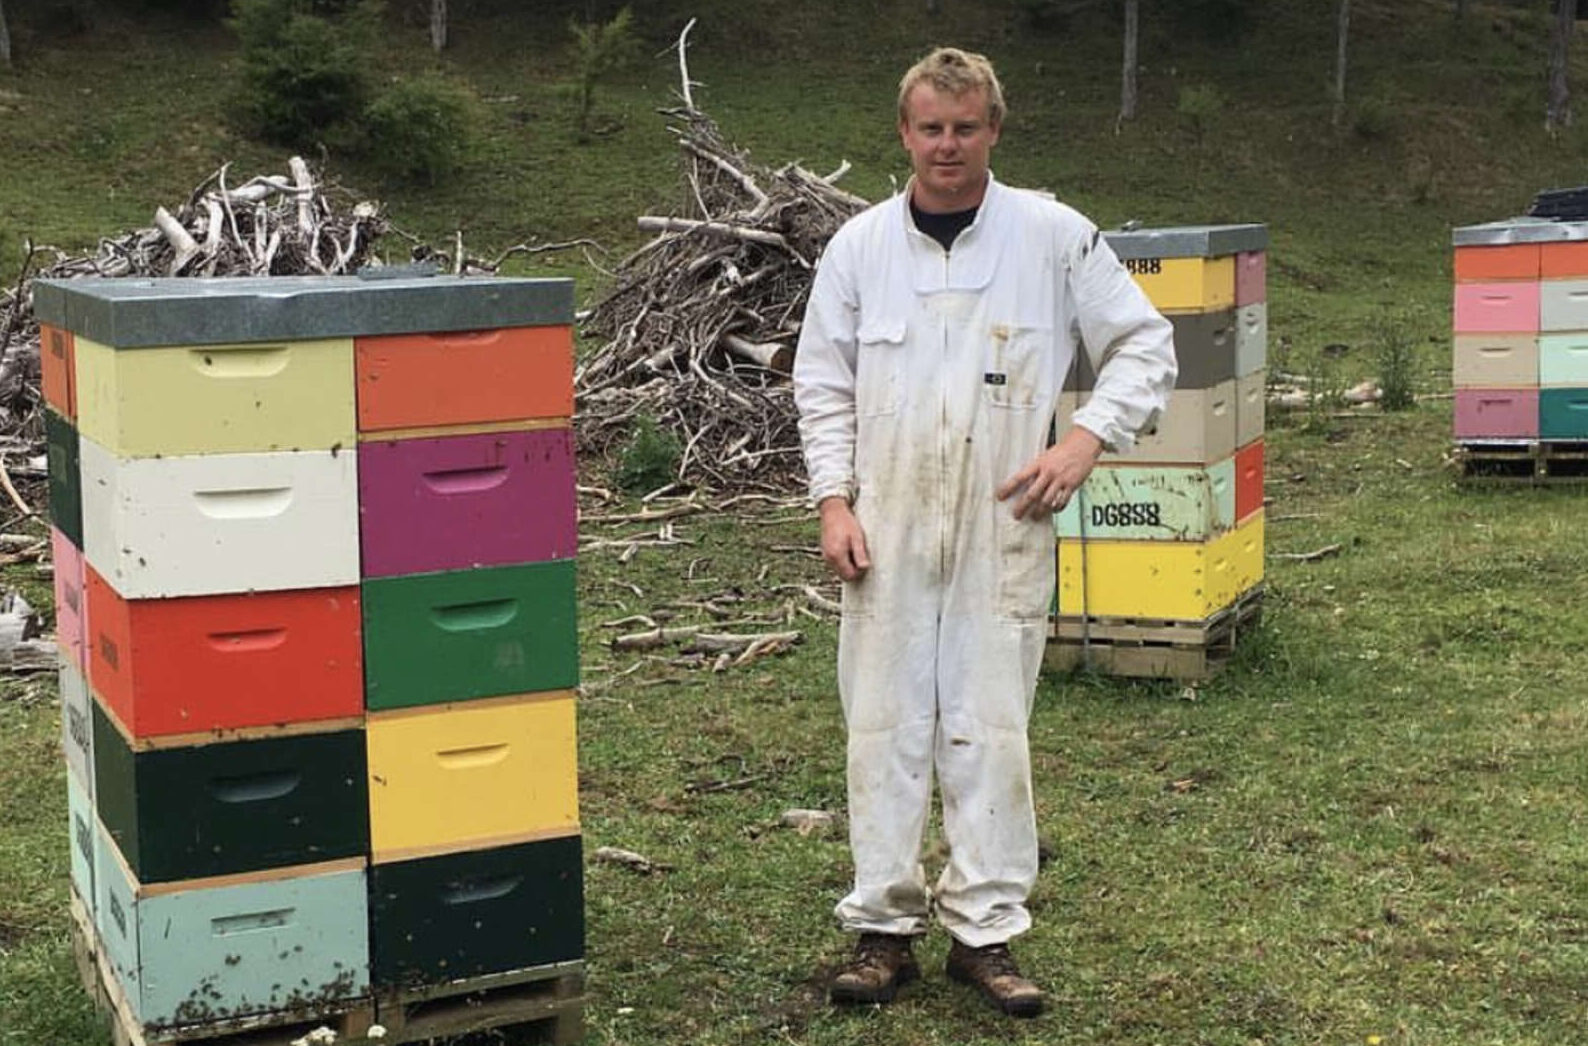 You are currently viewing Hive of activity at Waihī-based apiary